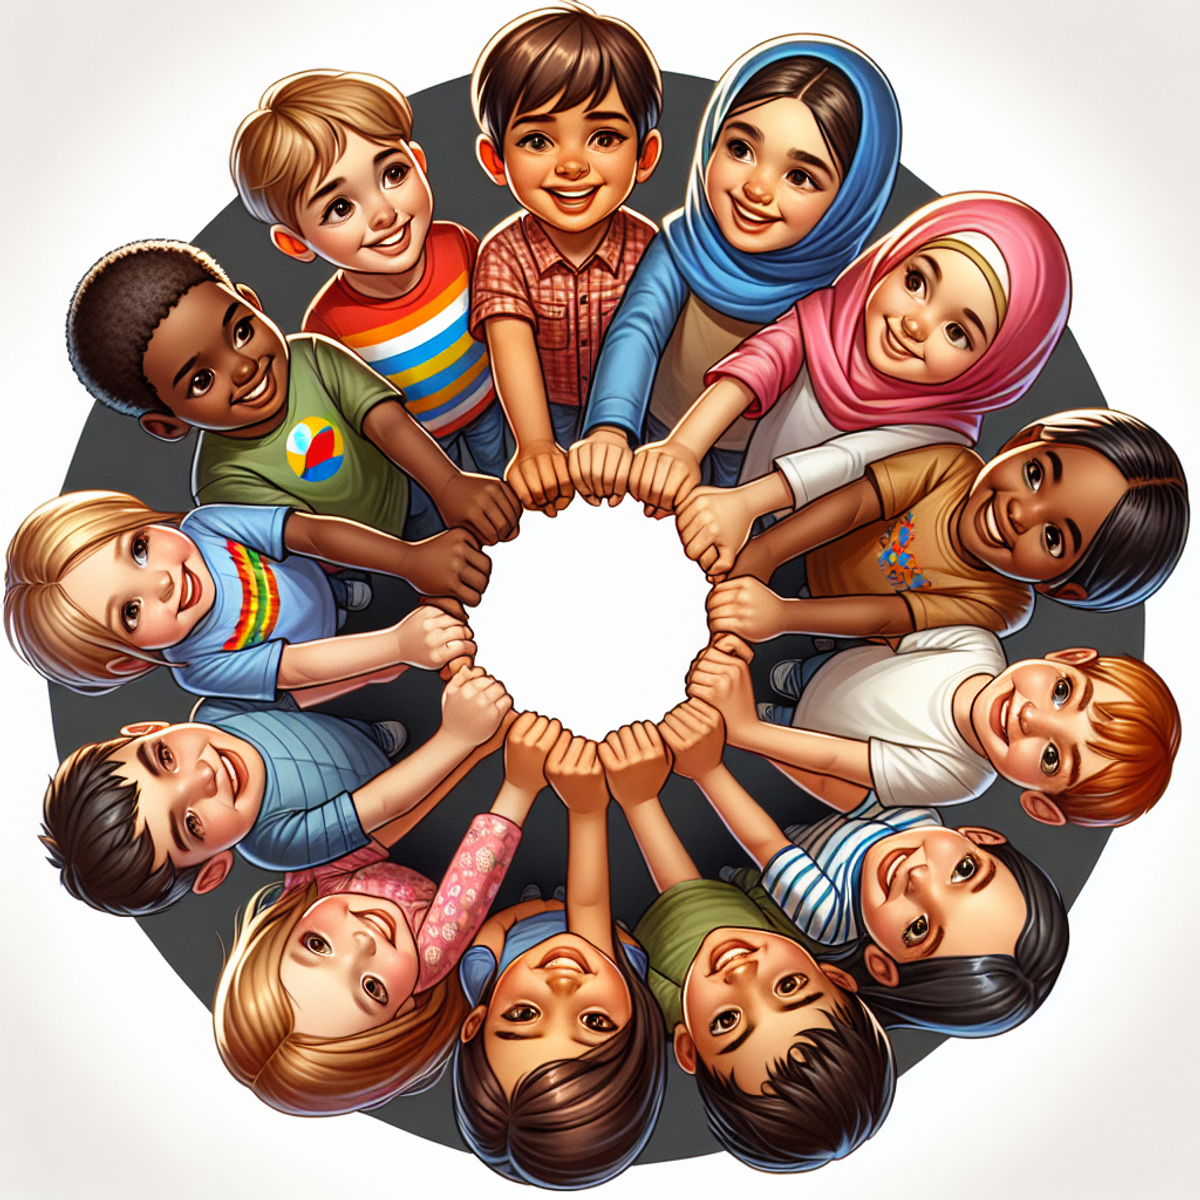 A diverse group of children holding hands in a circle, smiling and representing unity.